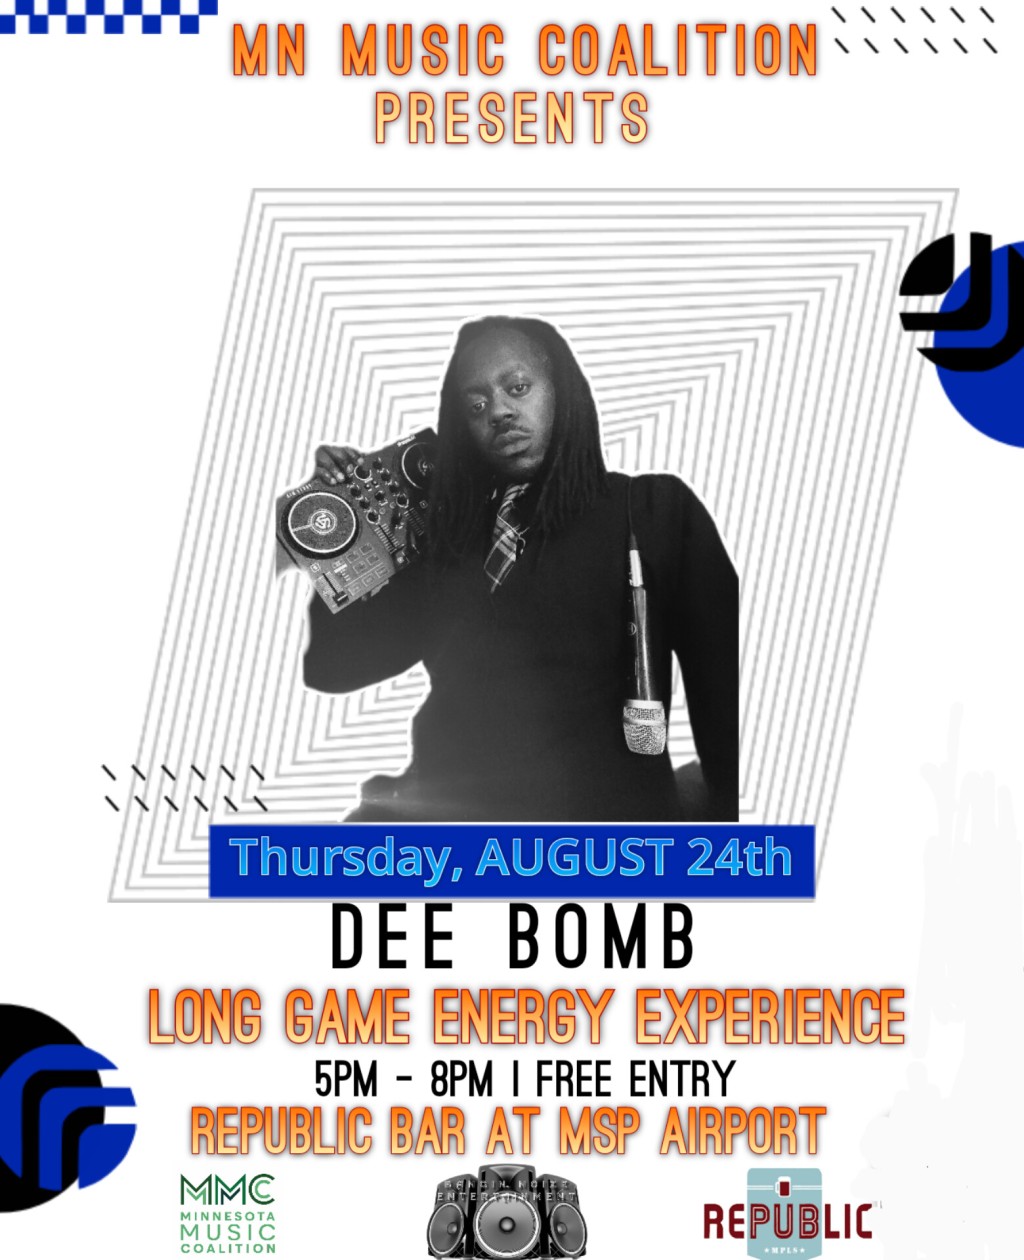 Dee Bomb Announced The “Long Game Energy Experience” on August 24th at the MSP Airport